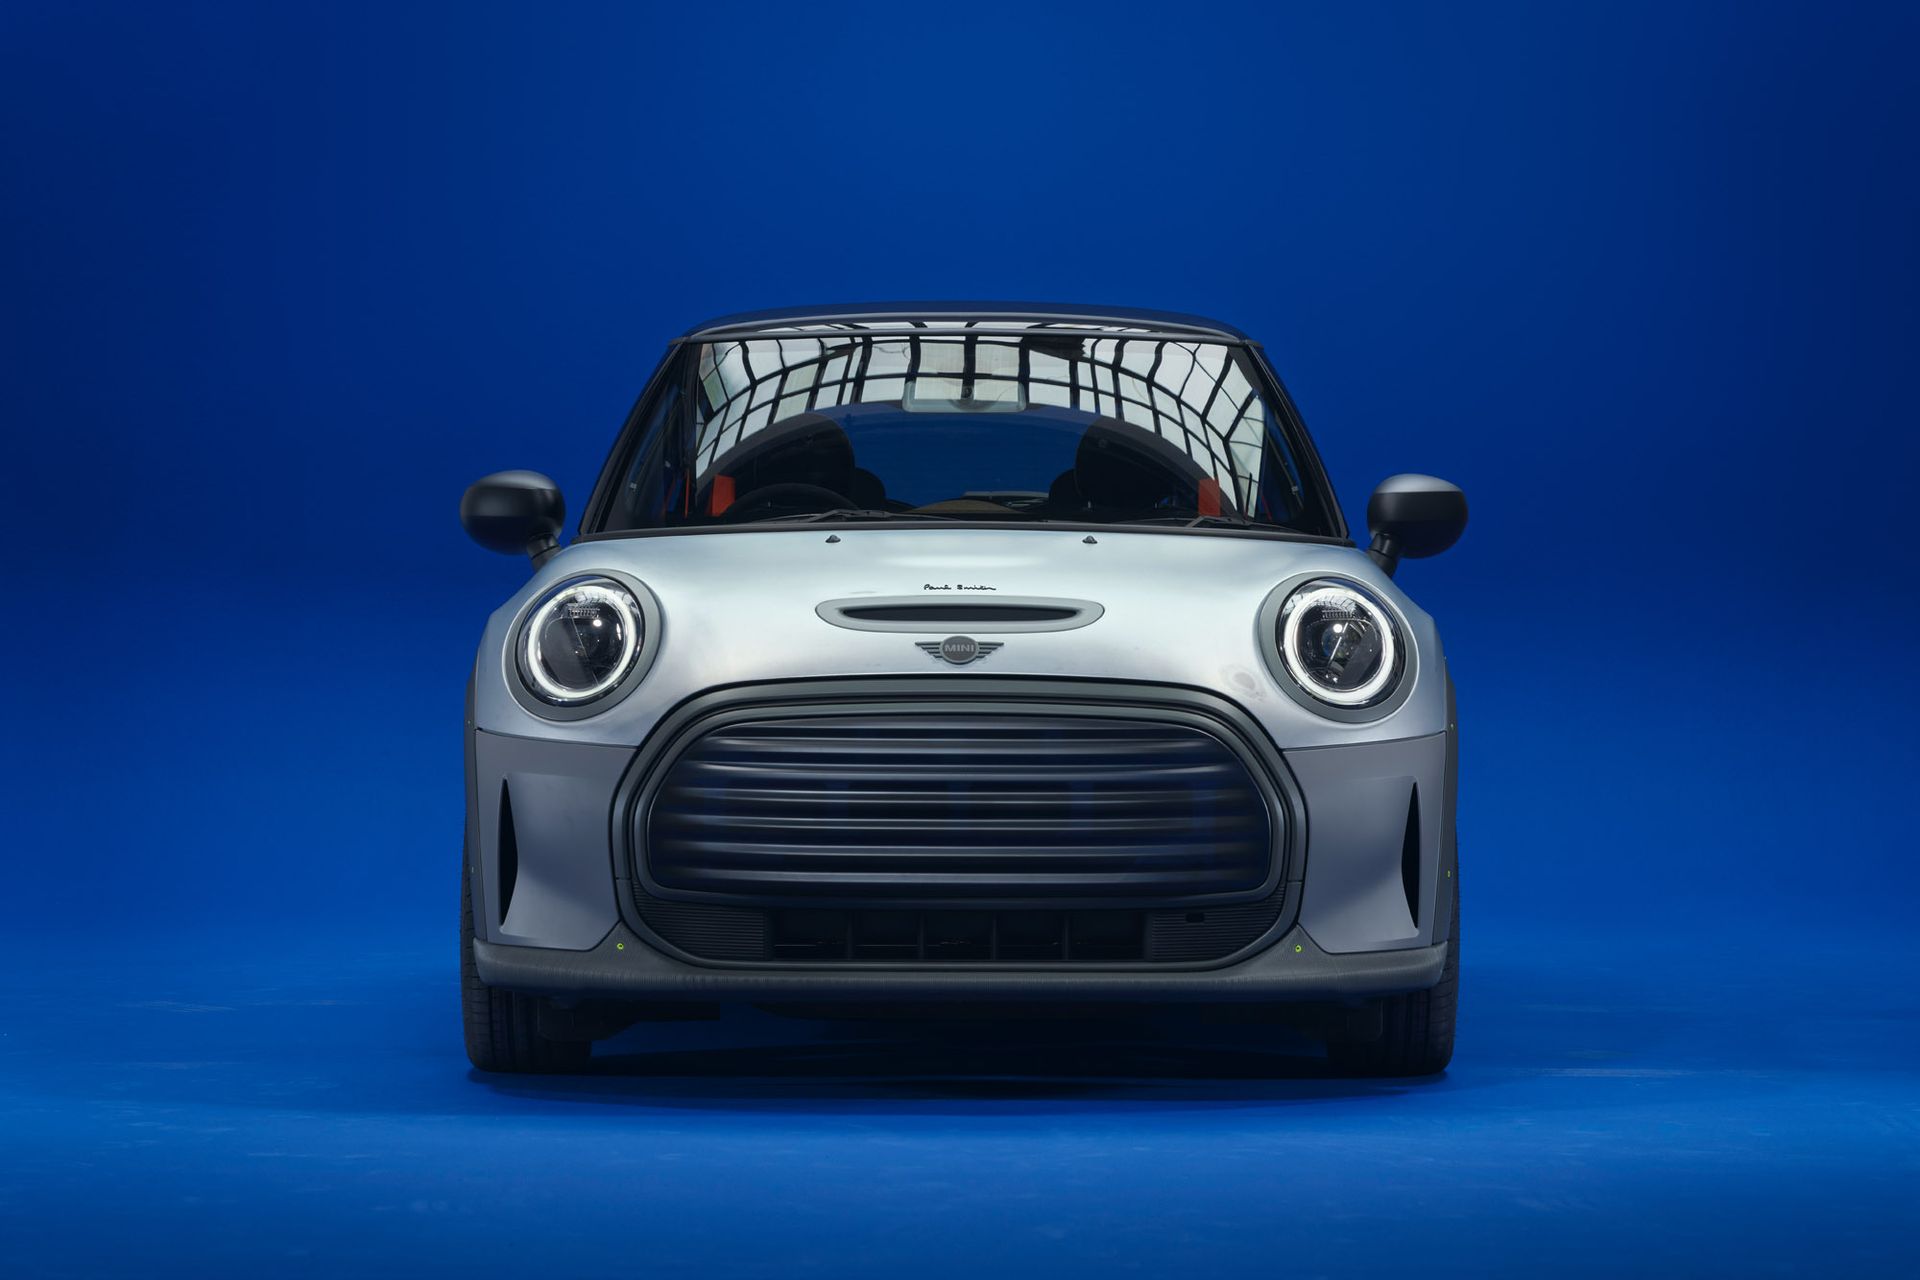 Paul Smith takes the new electric Mini for a spin | Wallpaper